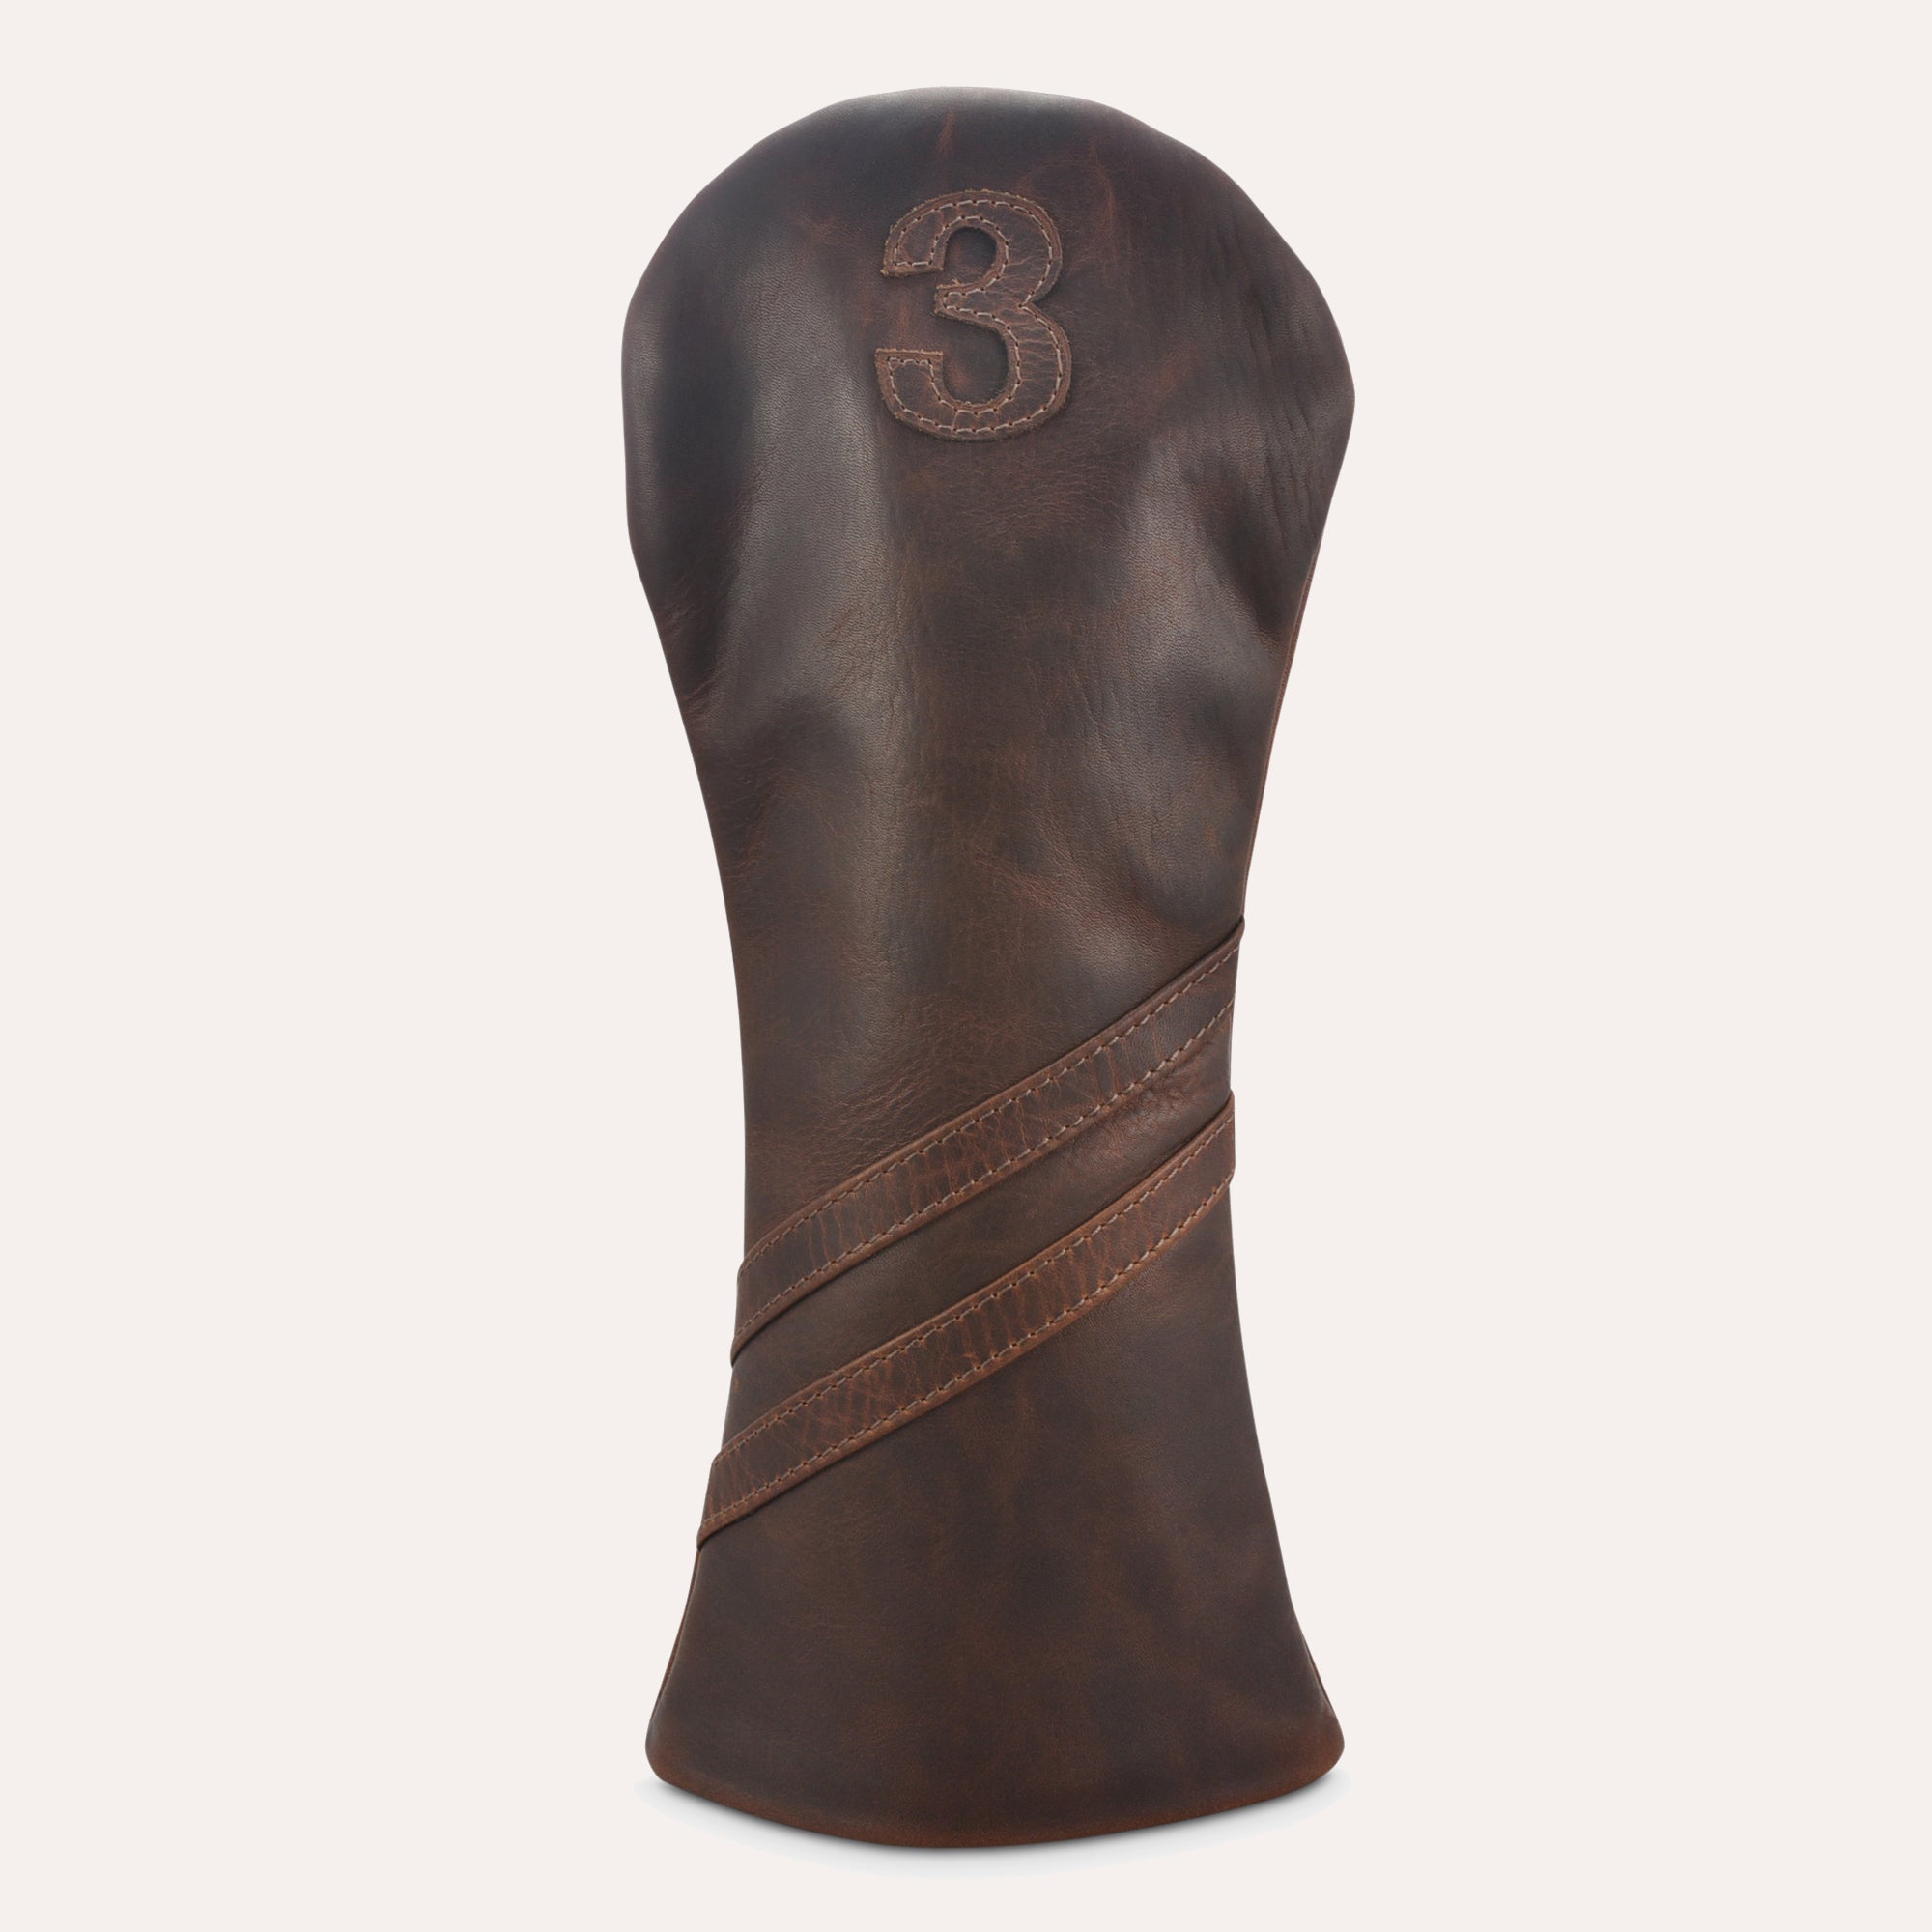 Leather Golf Headcover - KME means the very best